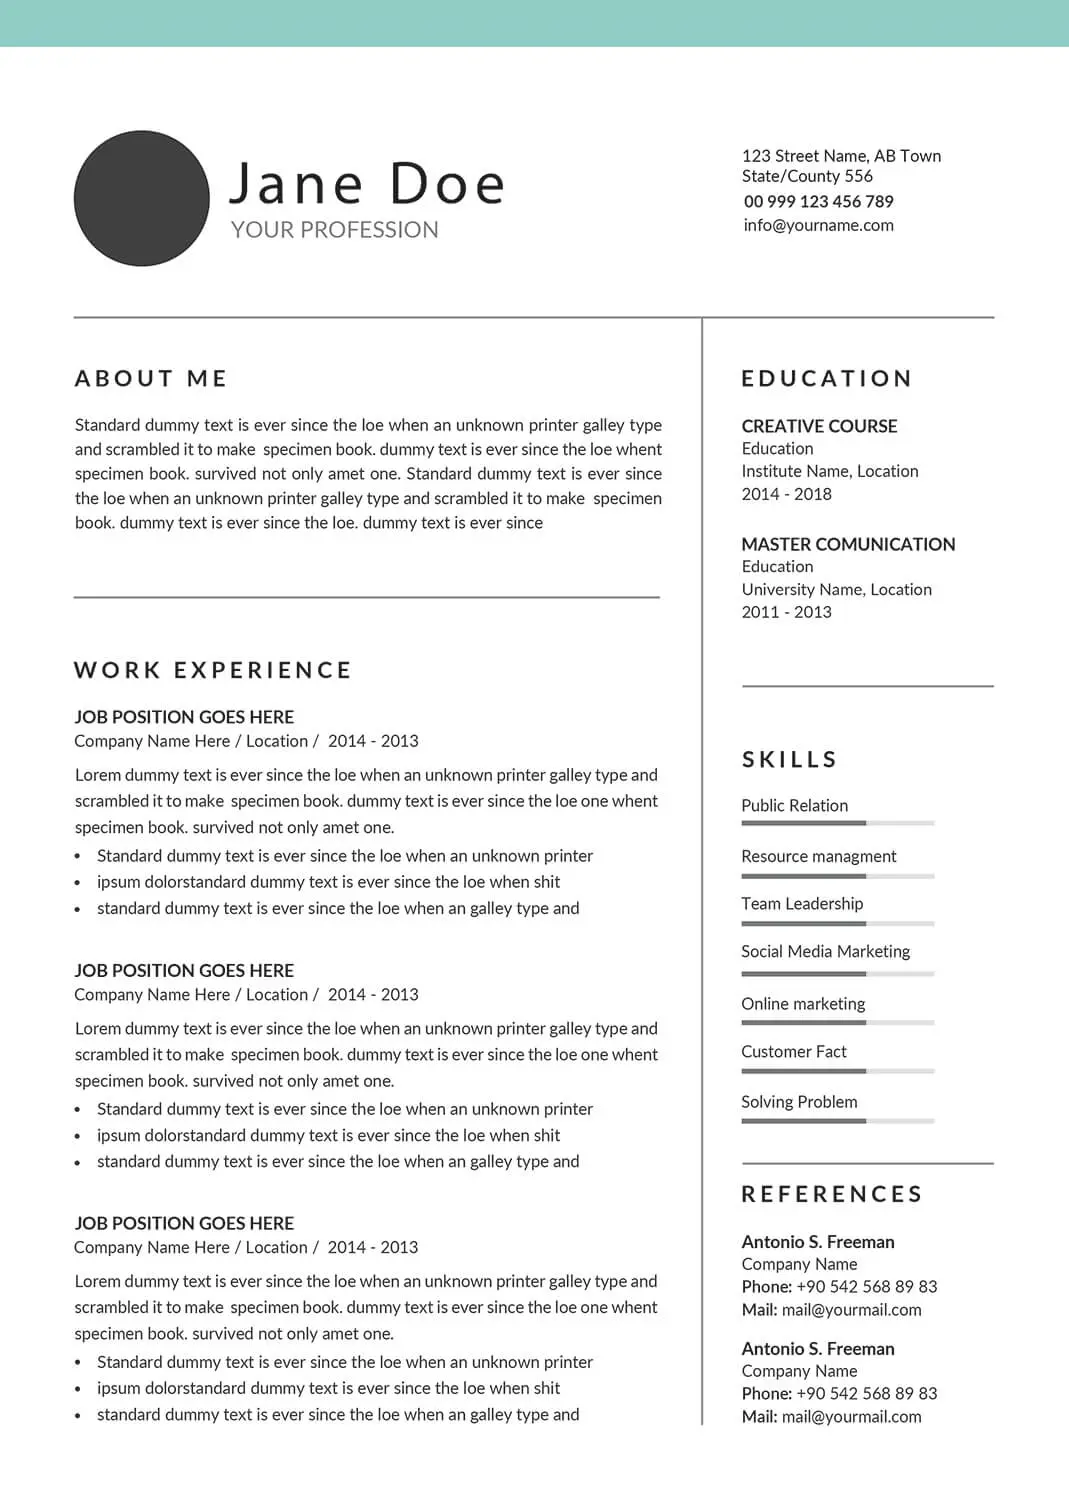 manager-resume